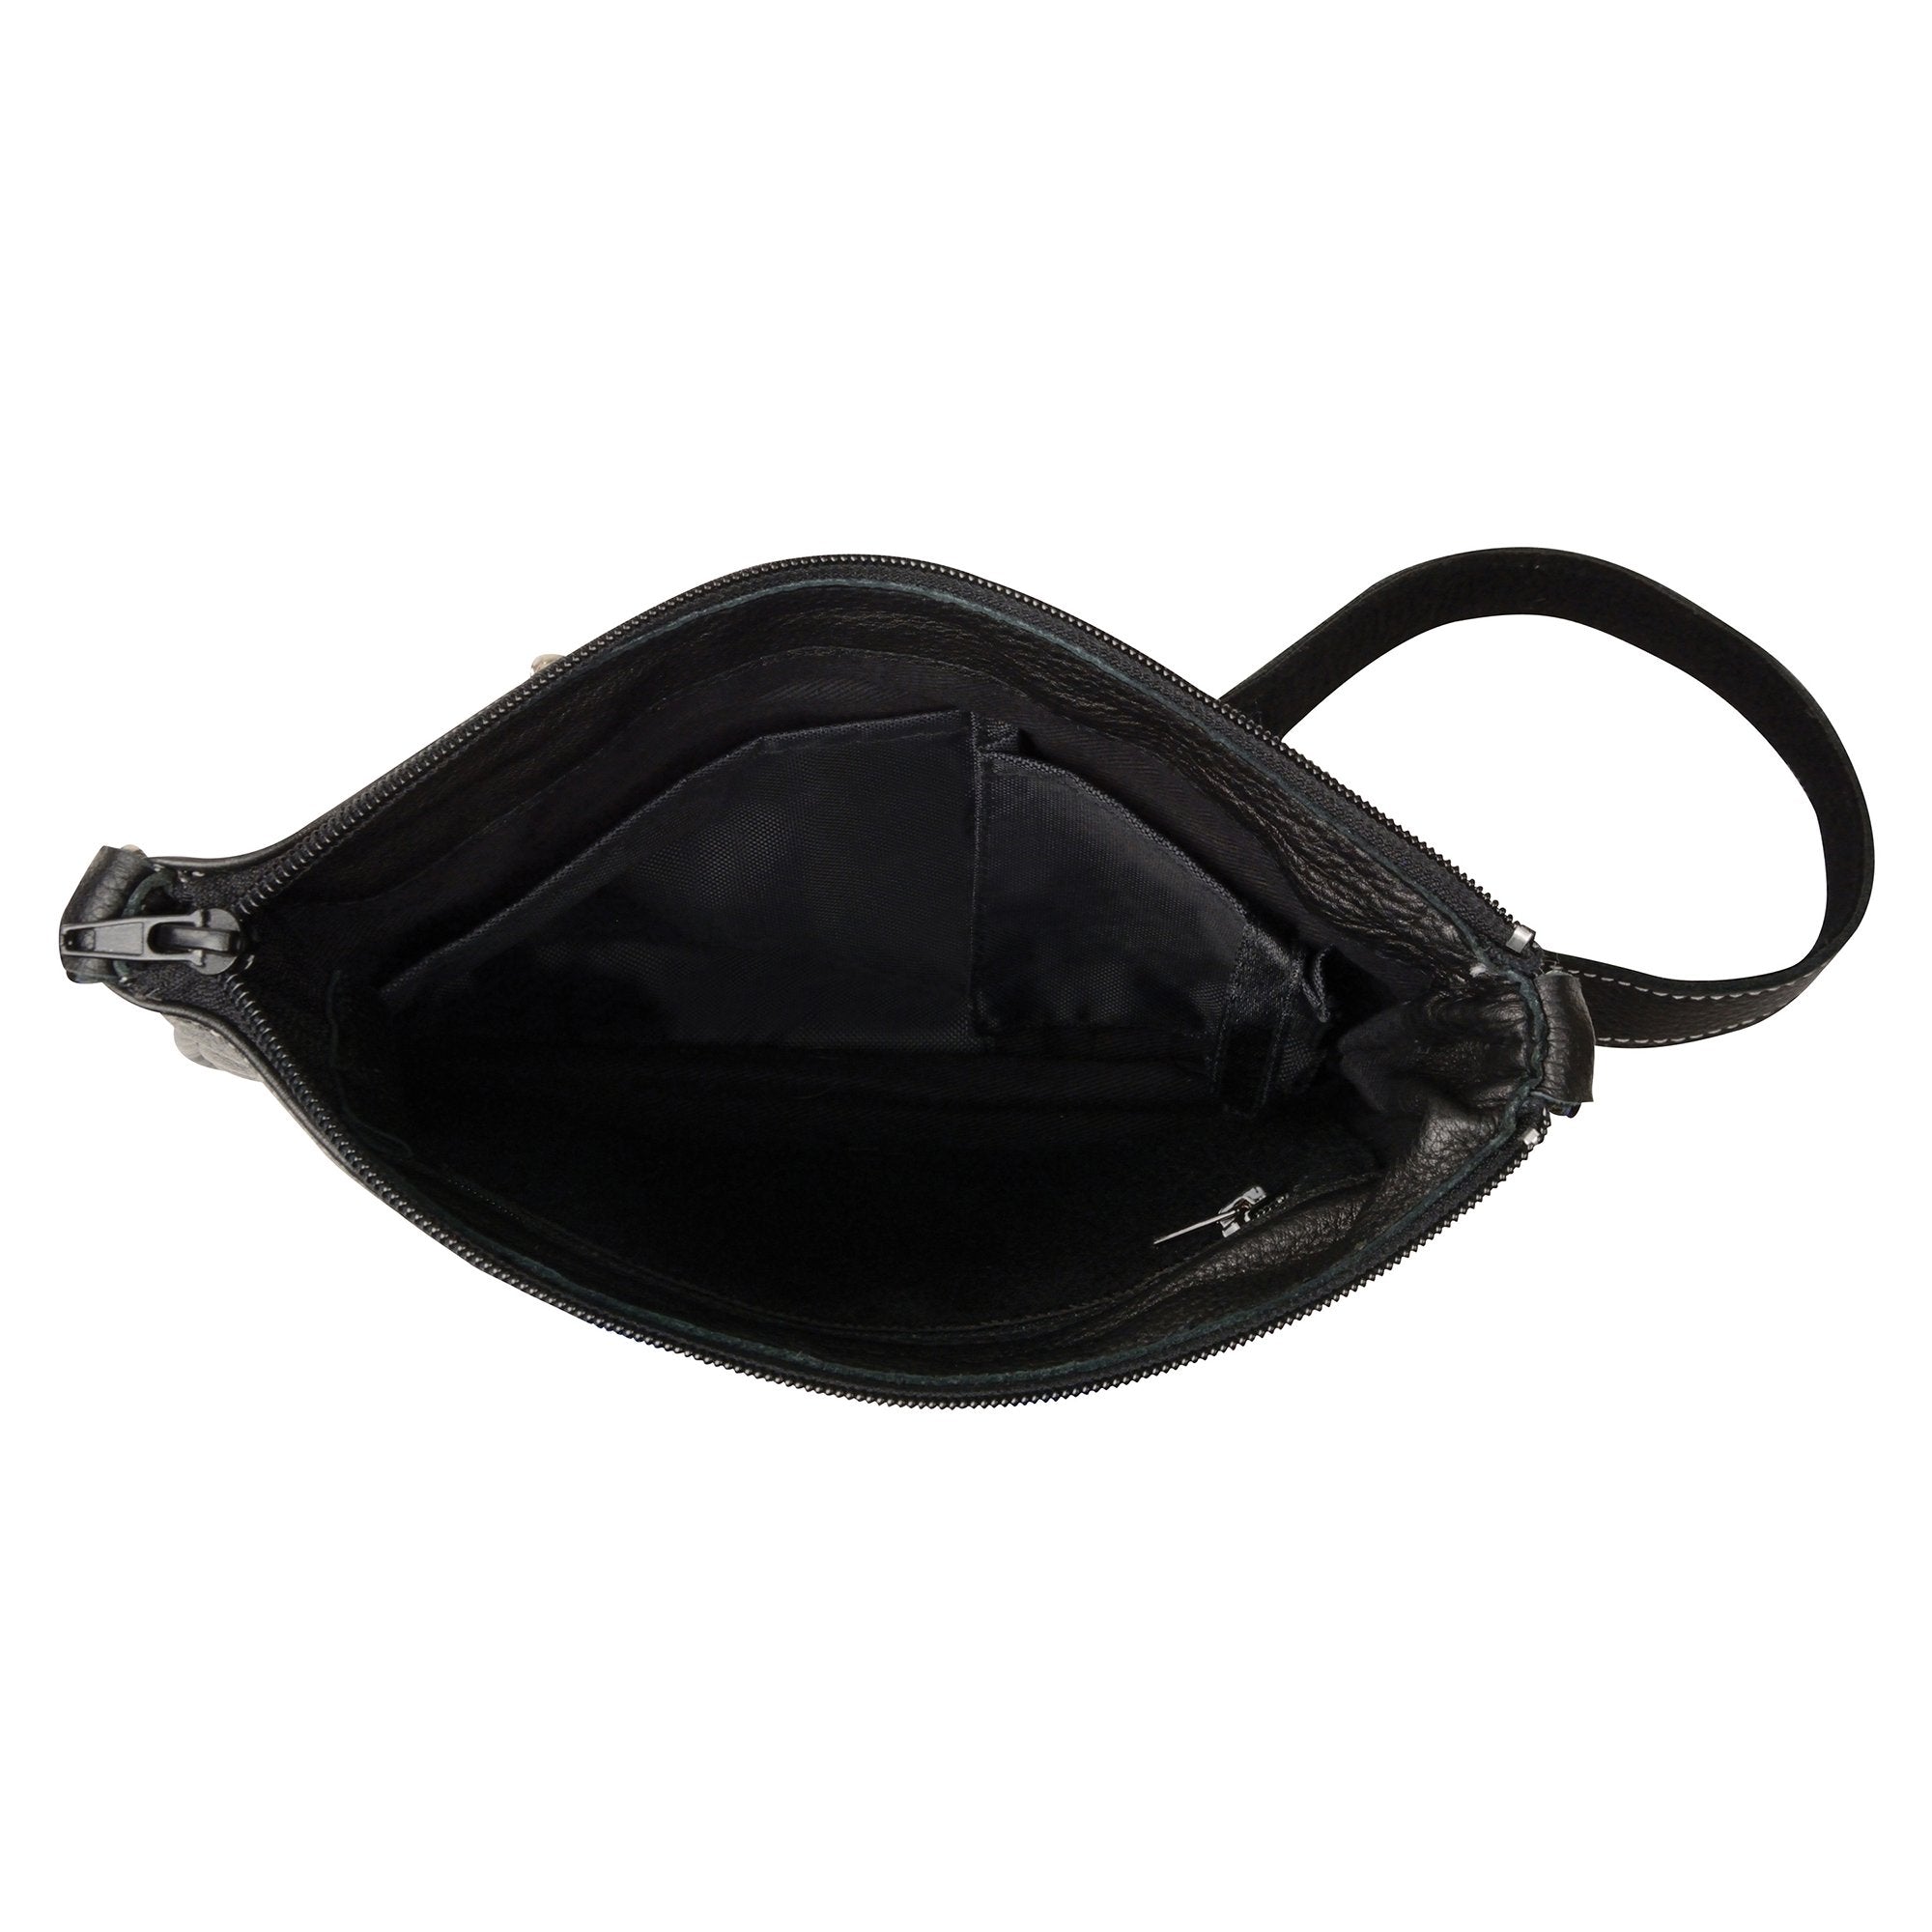 Milwaukee Leather MP8810 Women's Black Chain Strap Riveted Shoulder Bag with Gun Pocket